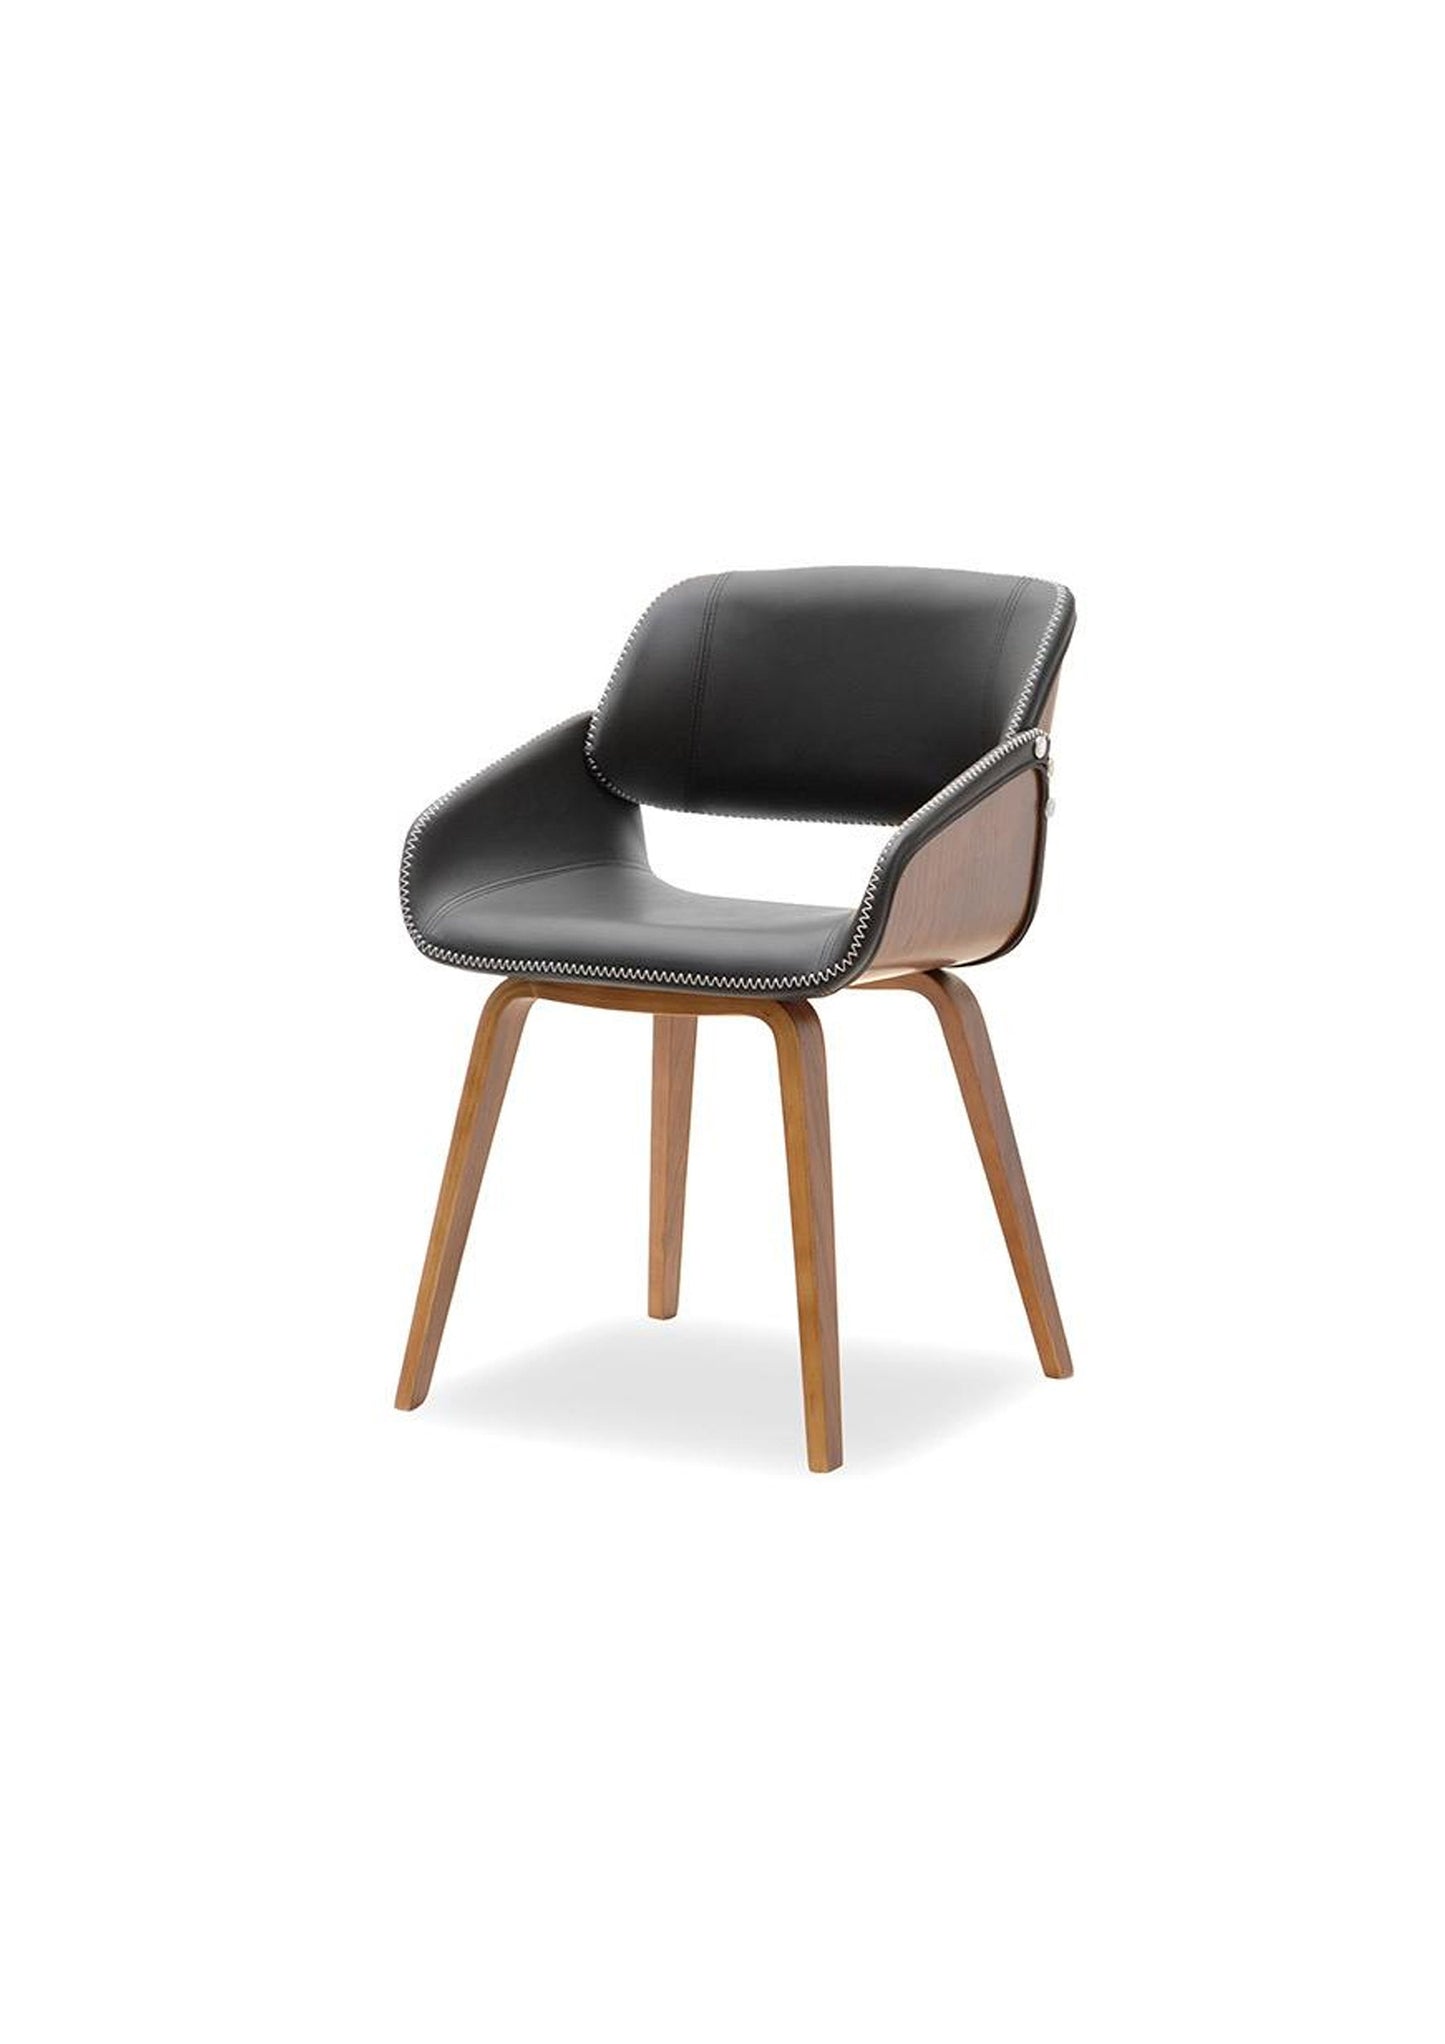 Designer Chair Retro Scandi Dining Desk Office chair in faux leather and walnut wood